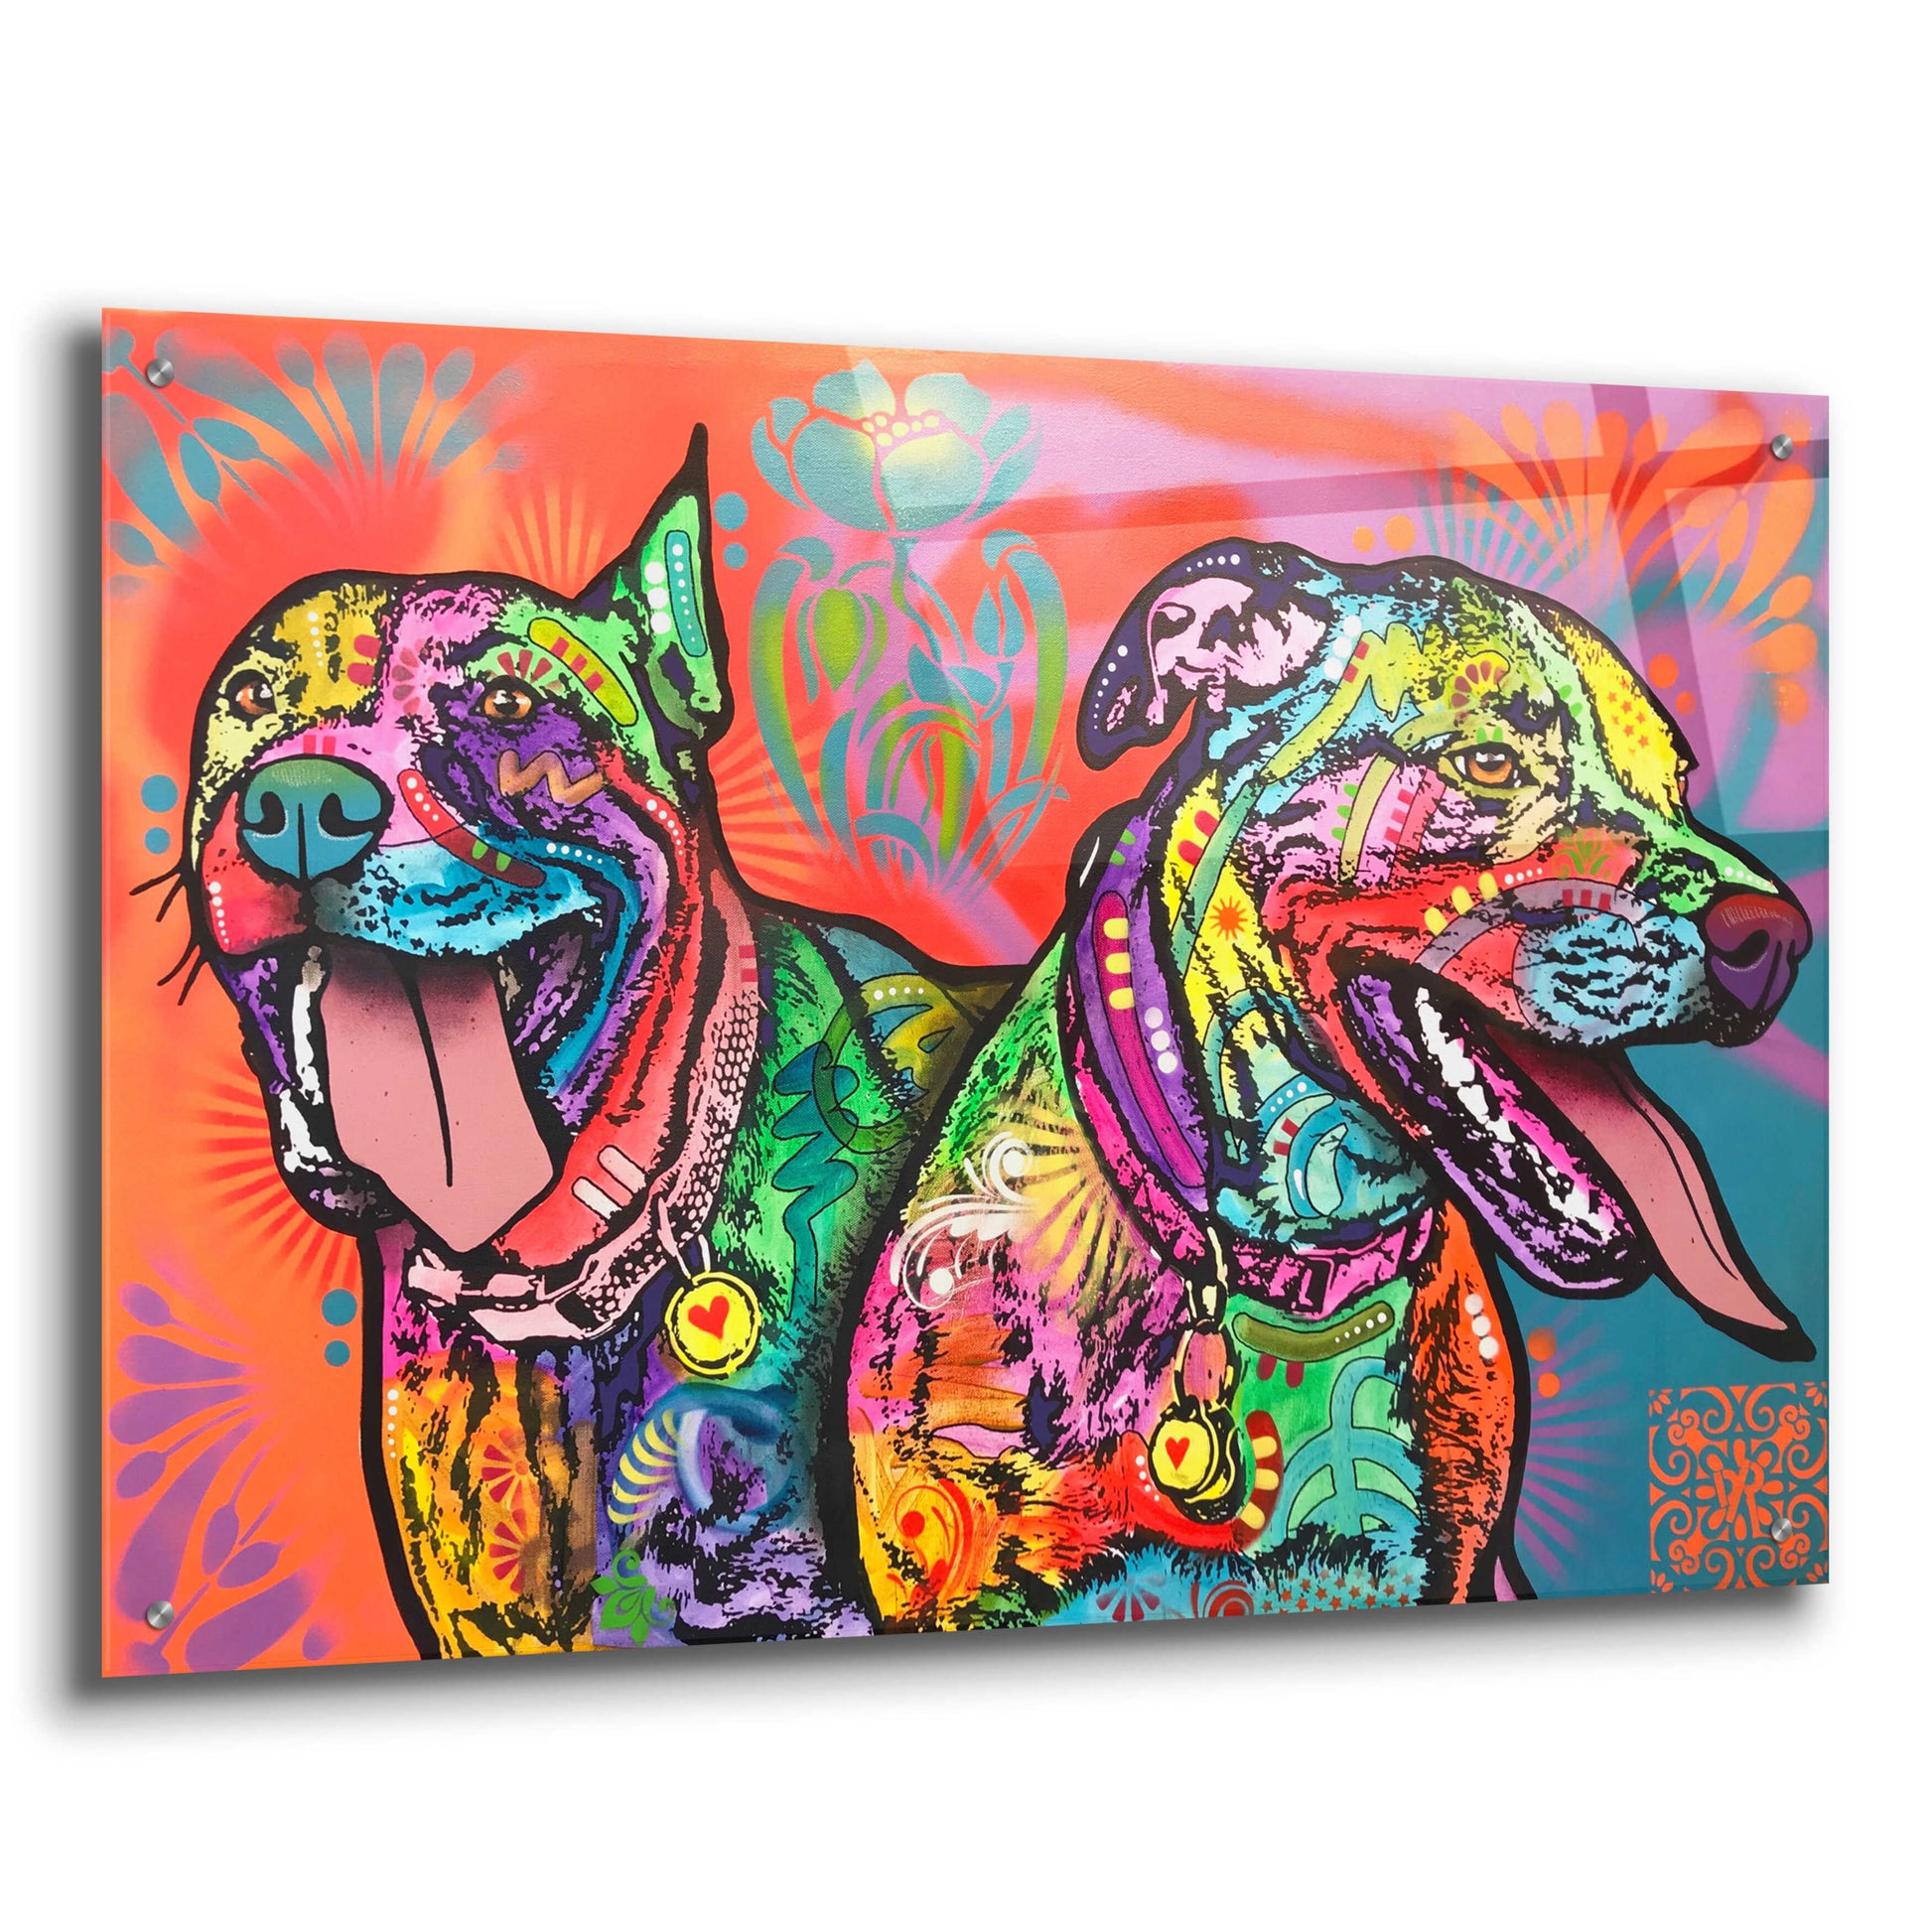 Epic Art 'Double the Fun' by Dean Russo, Acrylic Glass Wall Art,36x24